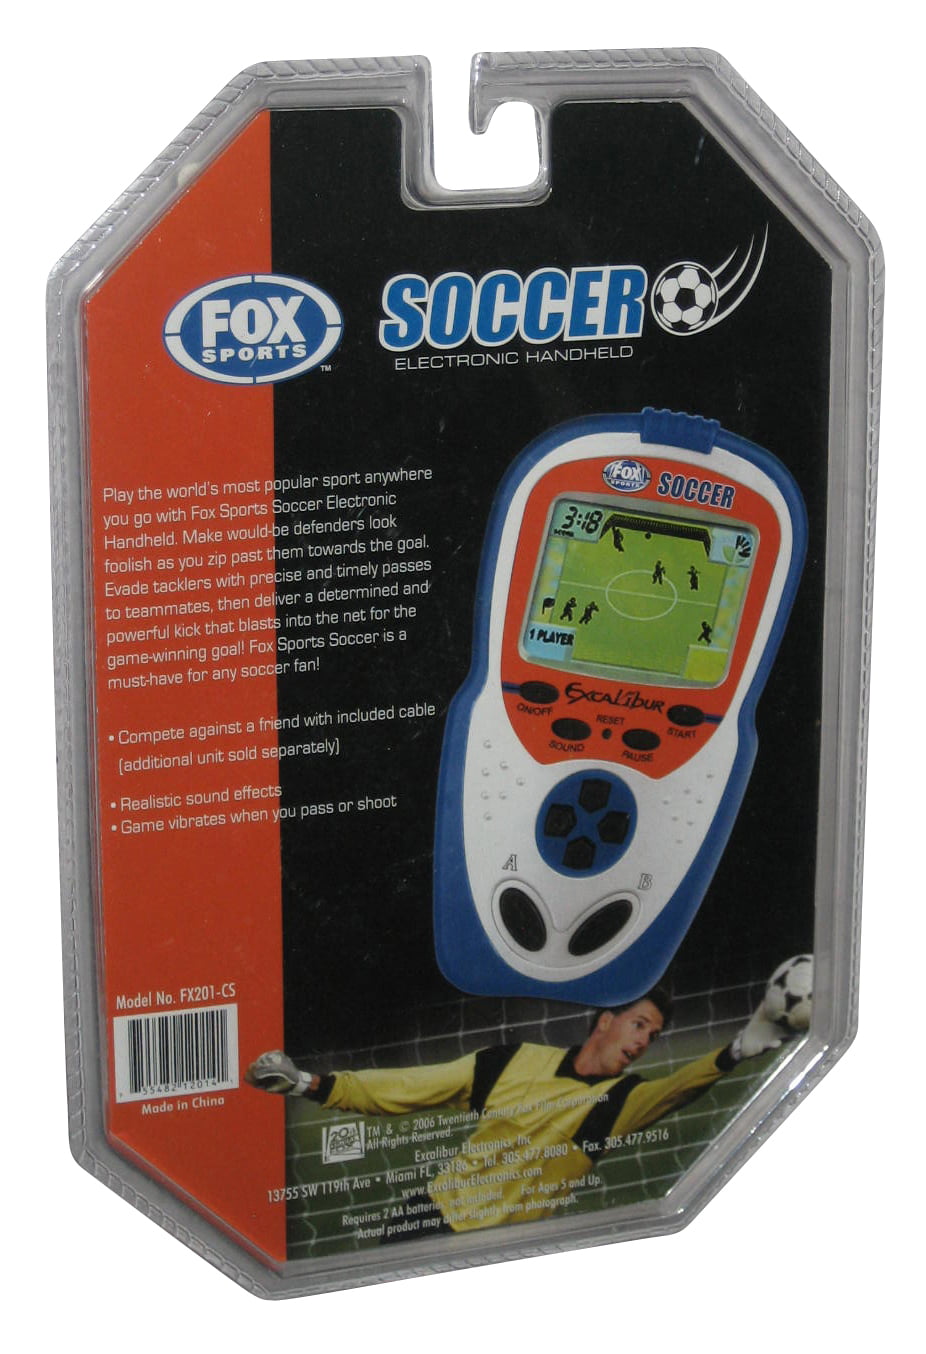 electronic soccer game